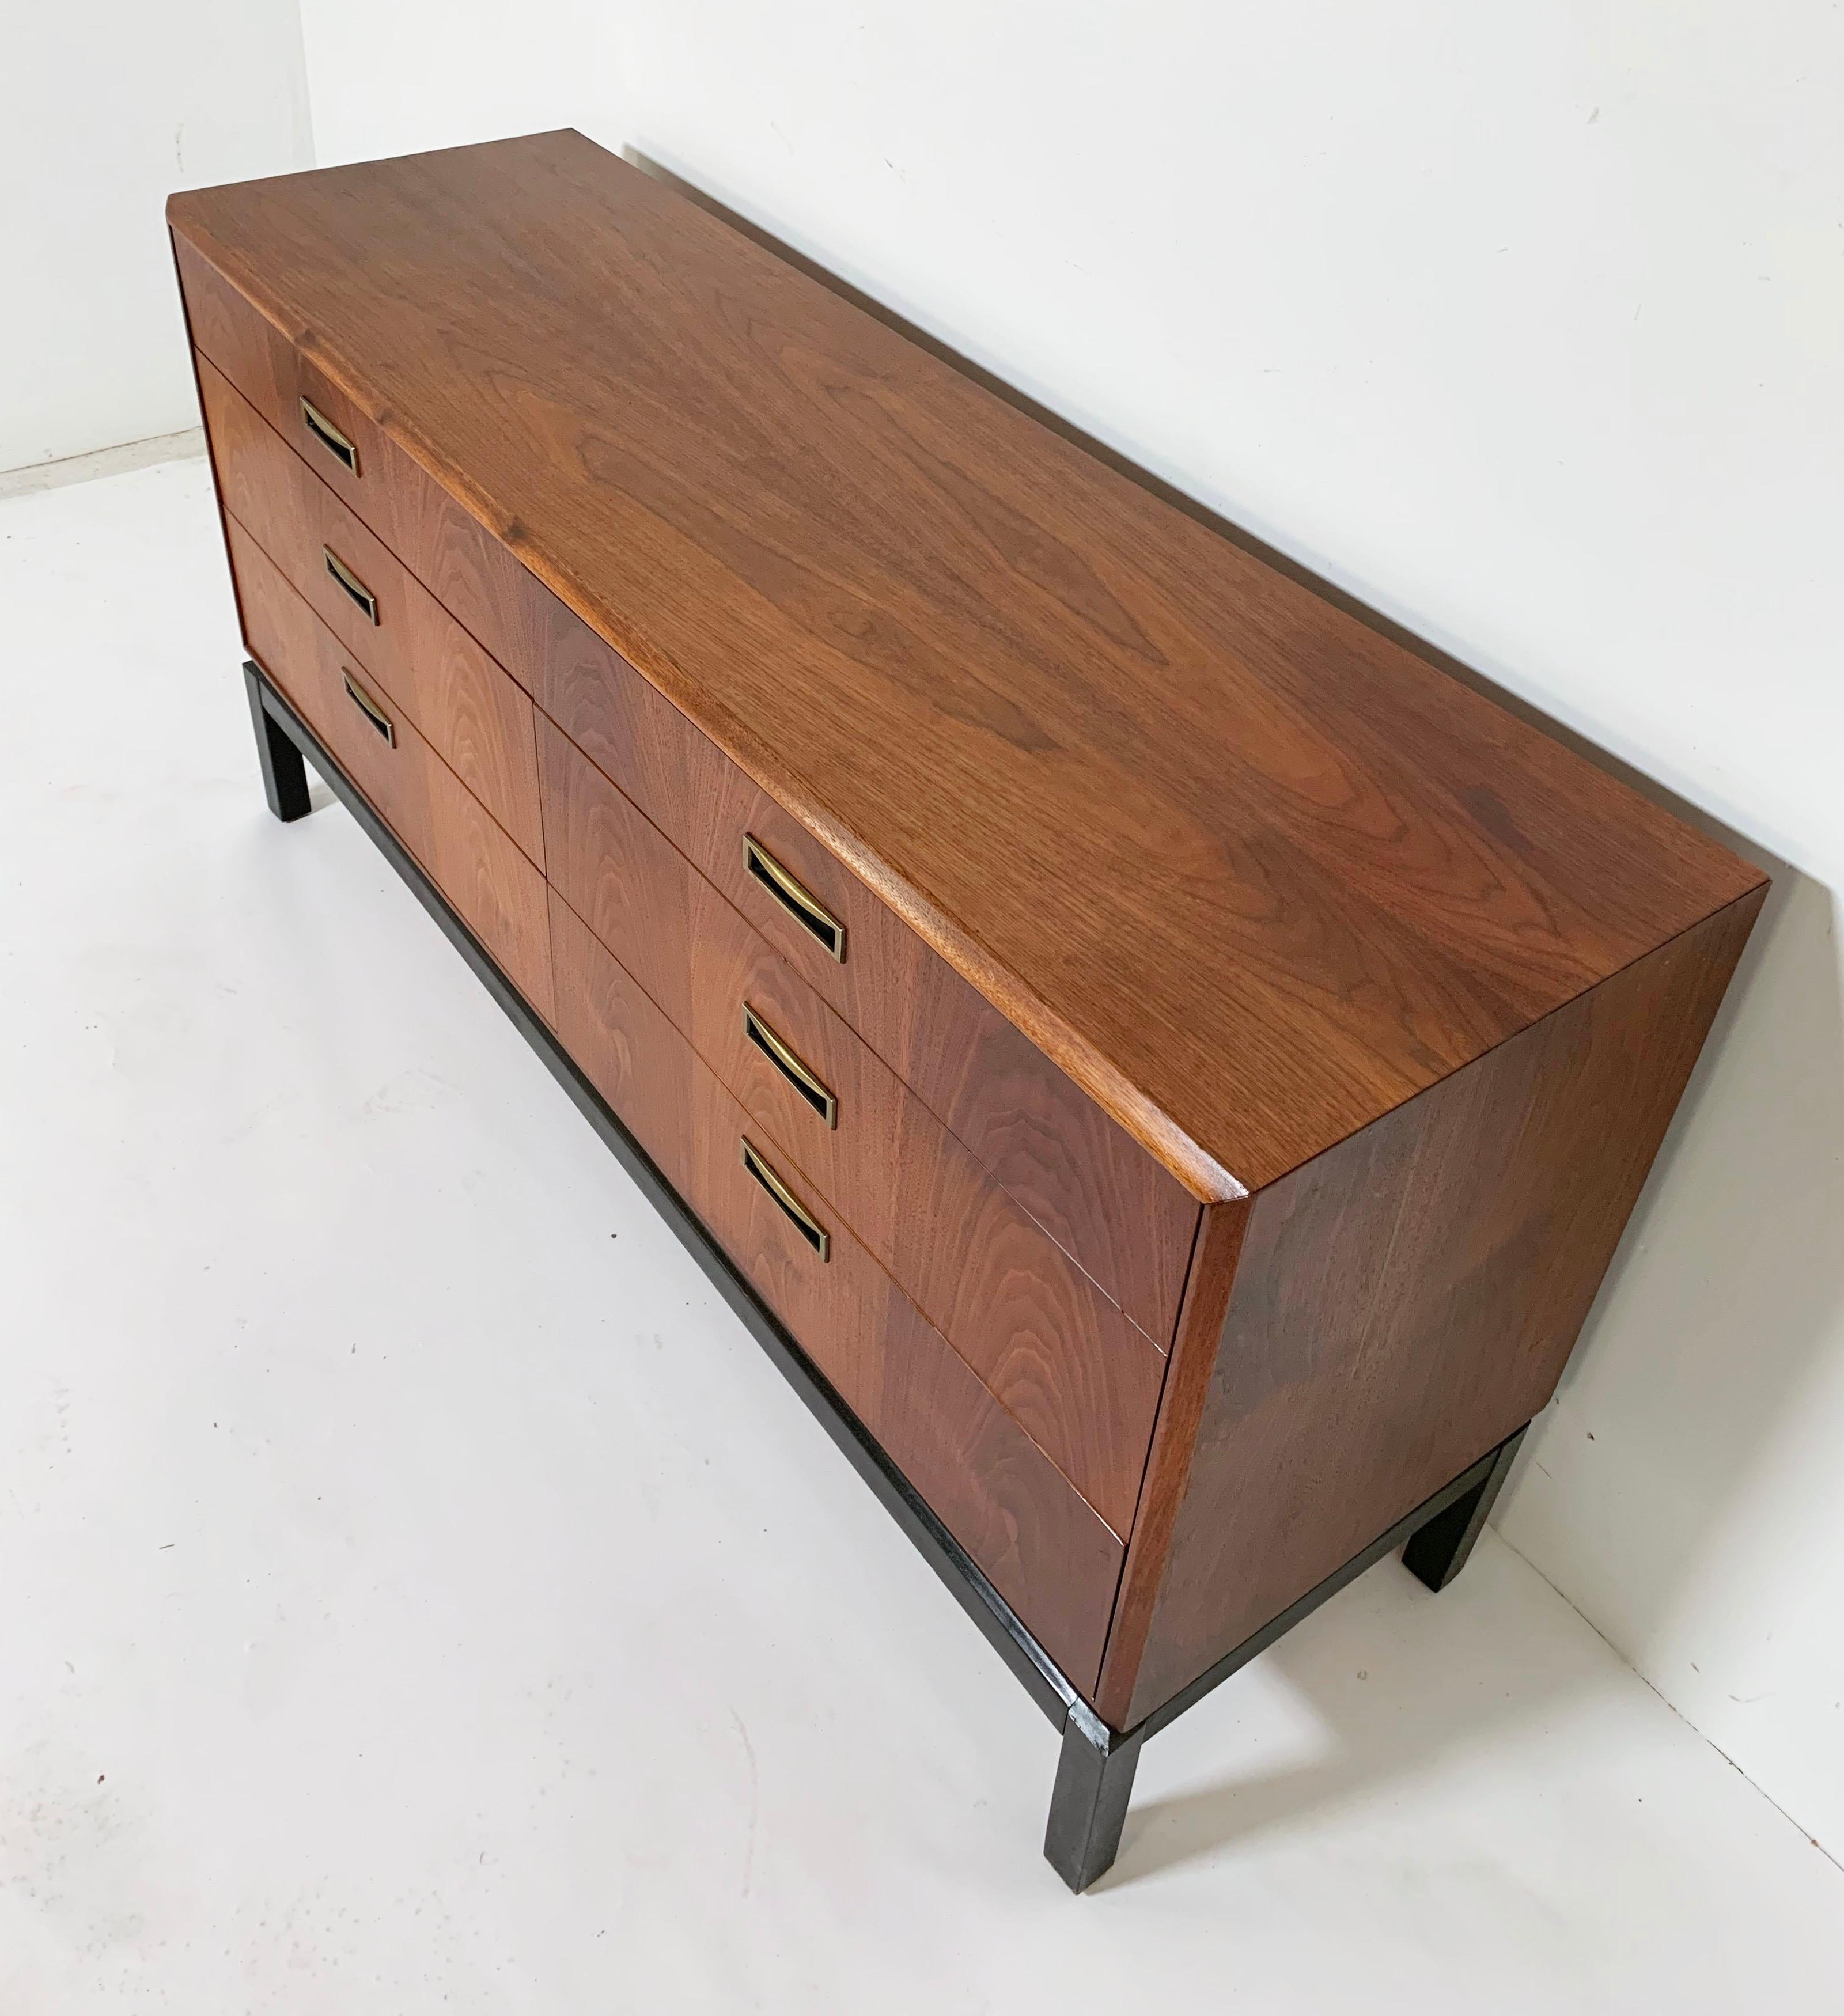 American Midcentury Six-Drawer Walnut Dresser by Jack Cartwright for Founders circa 1970s